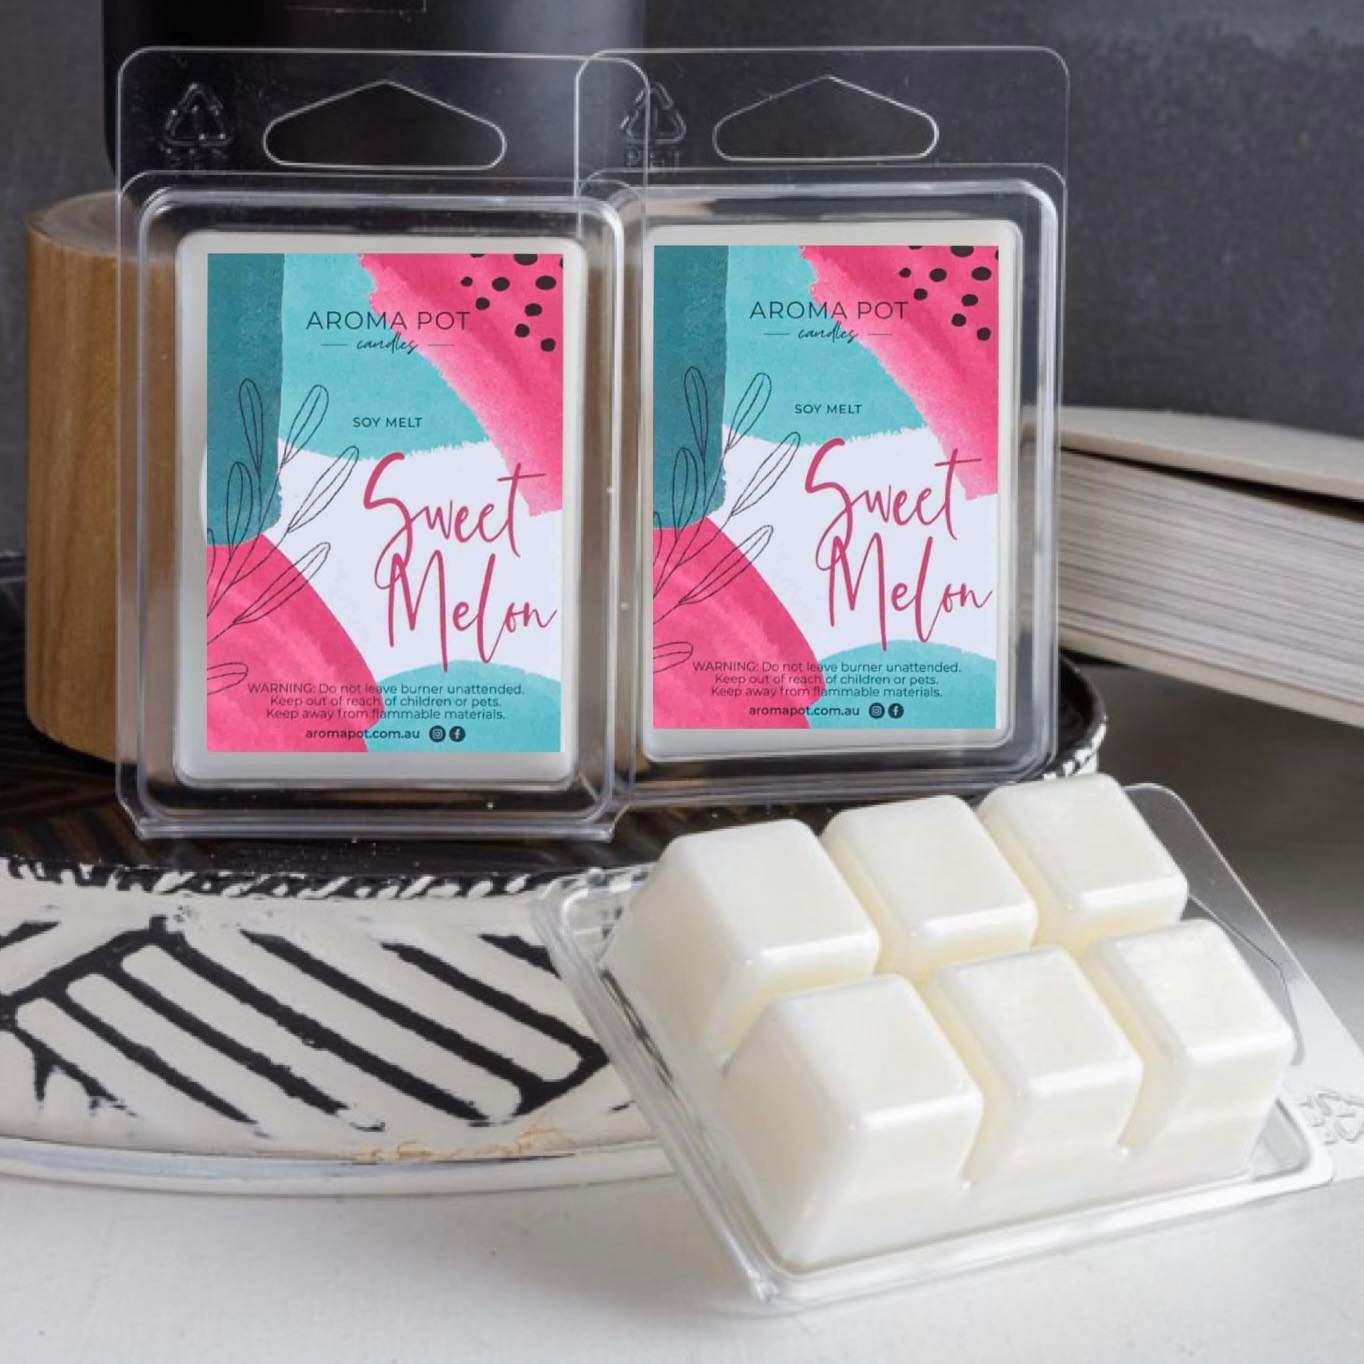 Classic soy melt bundle - 4 x soy melts of your choice